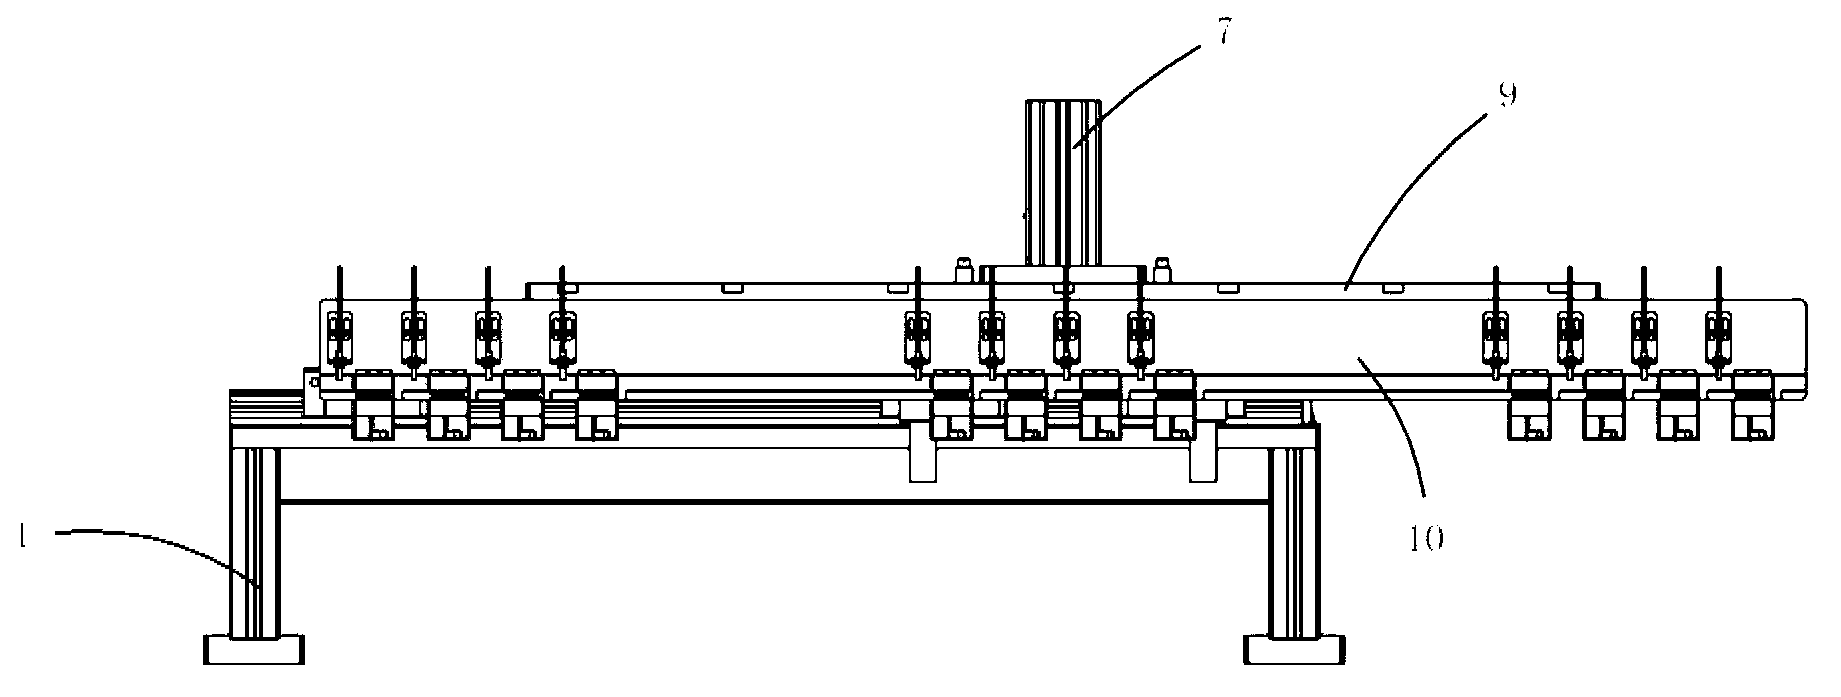 Automatic injection product carrying module